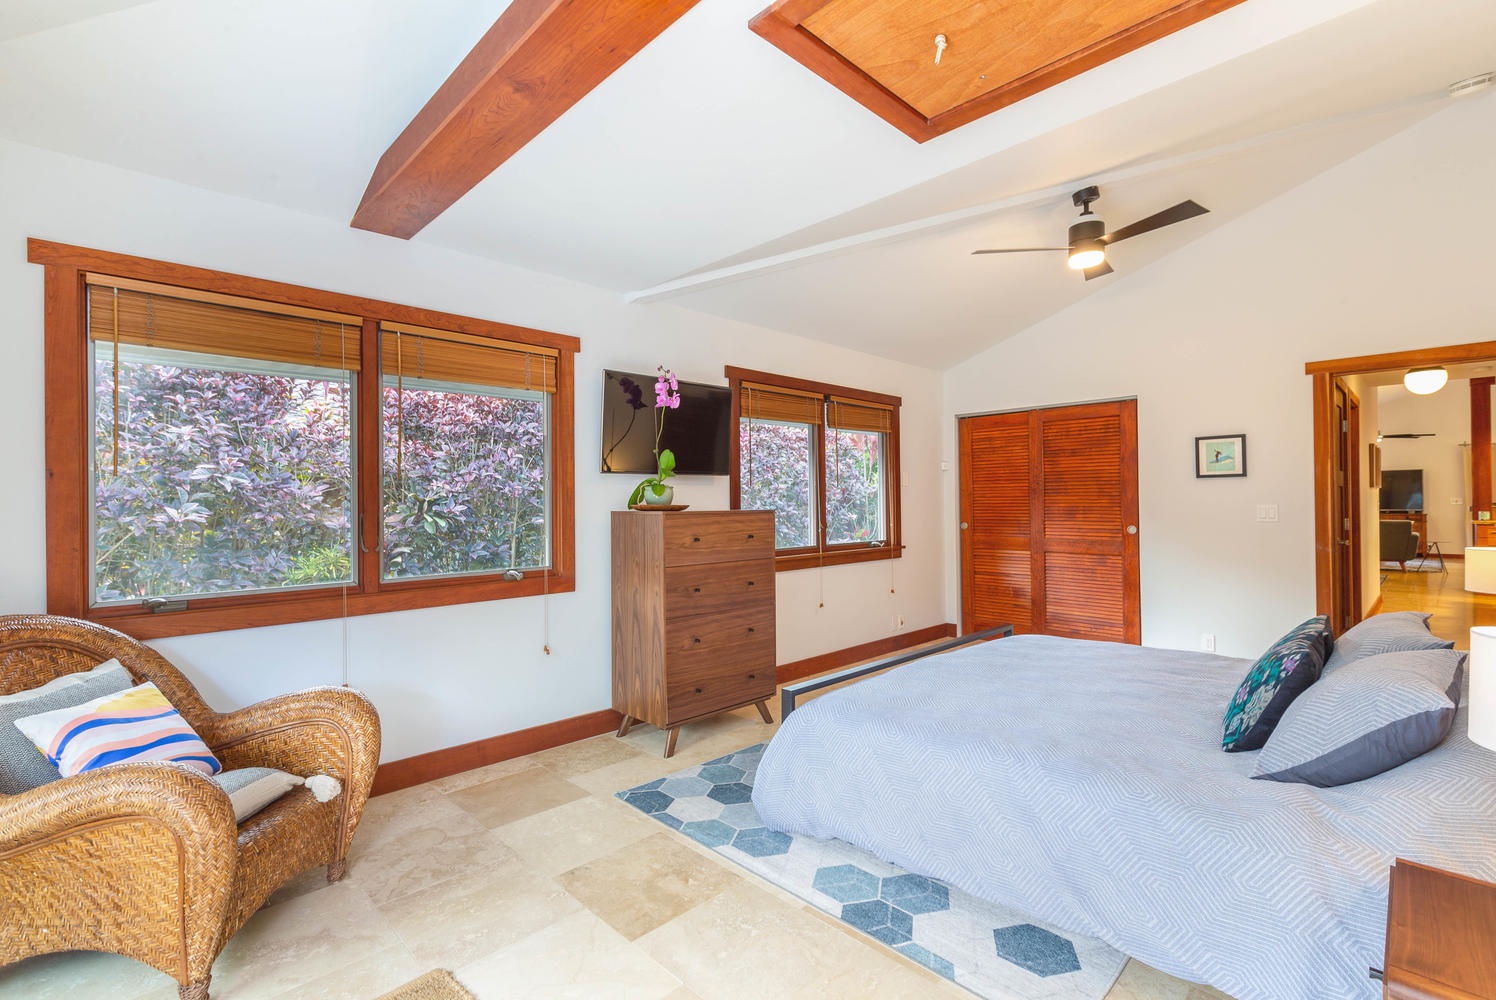 Princeville Vacation Rentals, Makana Lei - Spacious and comfortable second bedroom